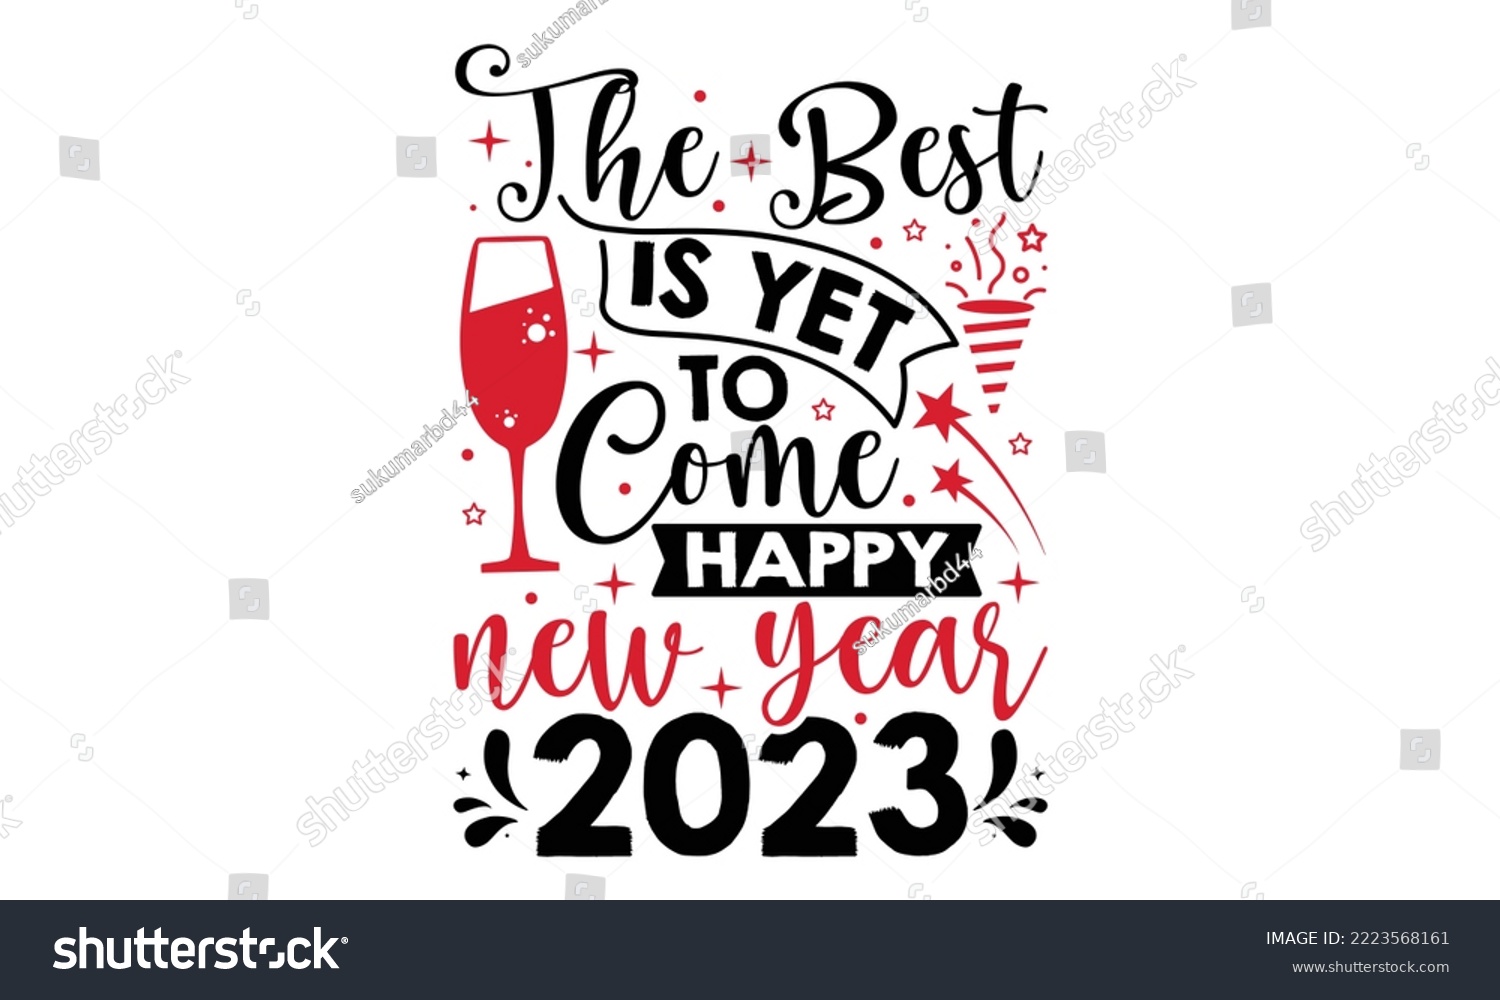 SVG of The Best Is Yet To Come Happy New Year 2023 - Happy New Year SVG Design, Handmade calligraphy vector illustration, Illustration for prints on t-shirt and bags, posters svg